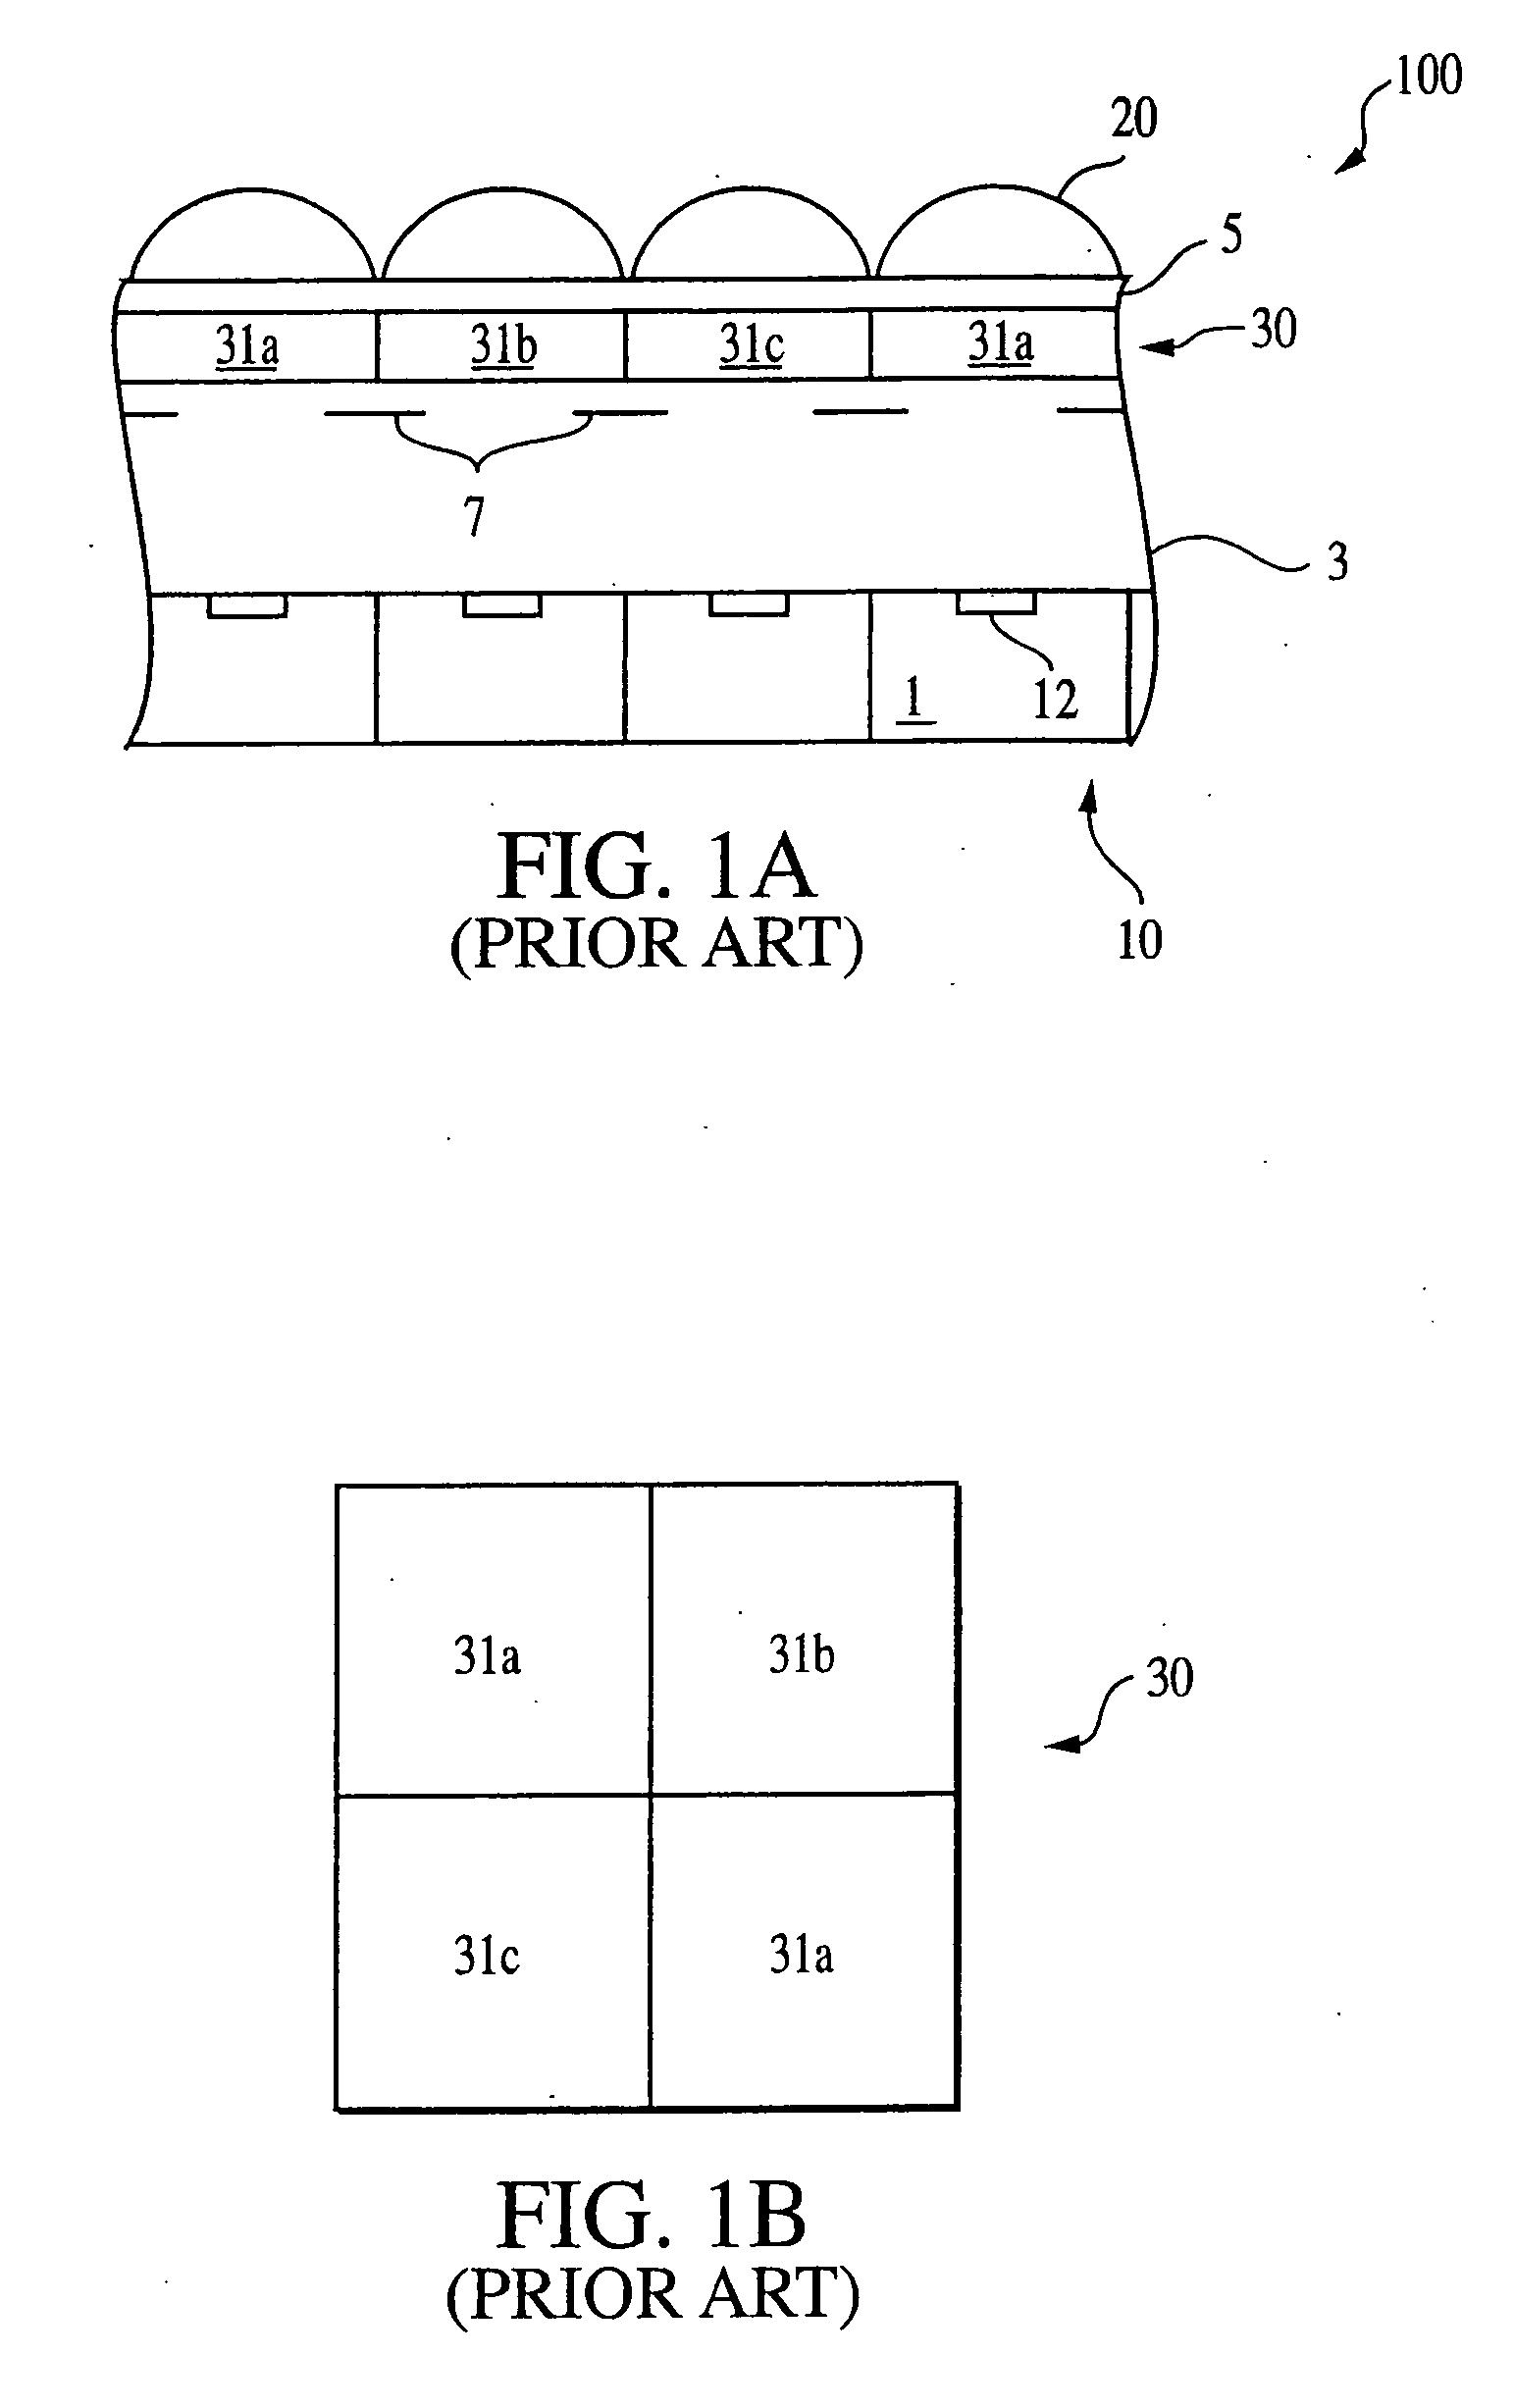 Photonic crystal-based filter for use in an image sensor